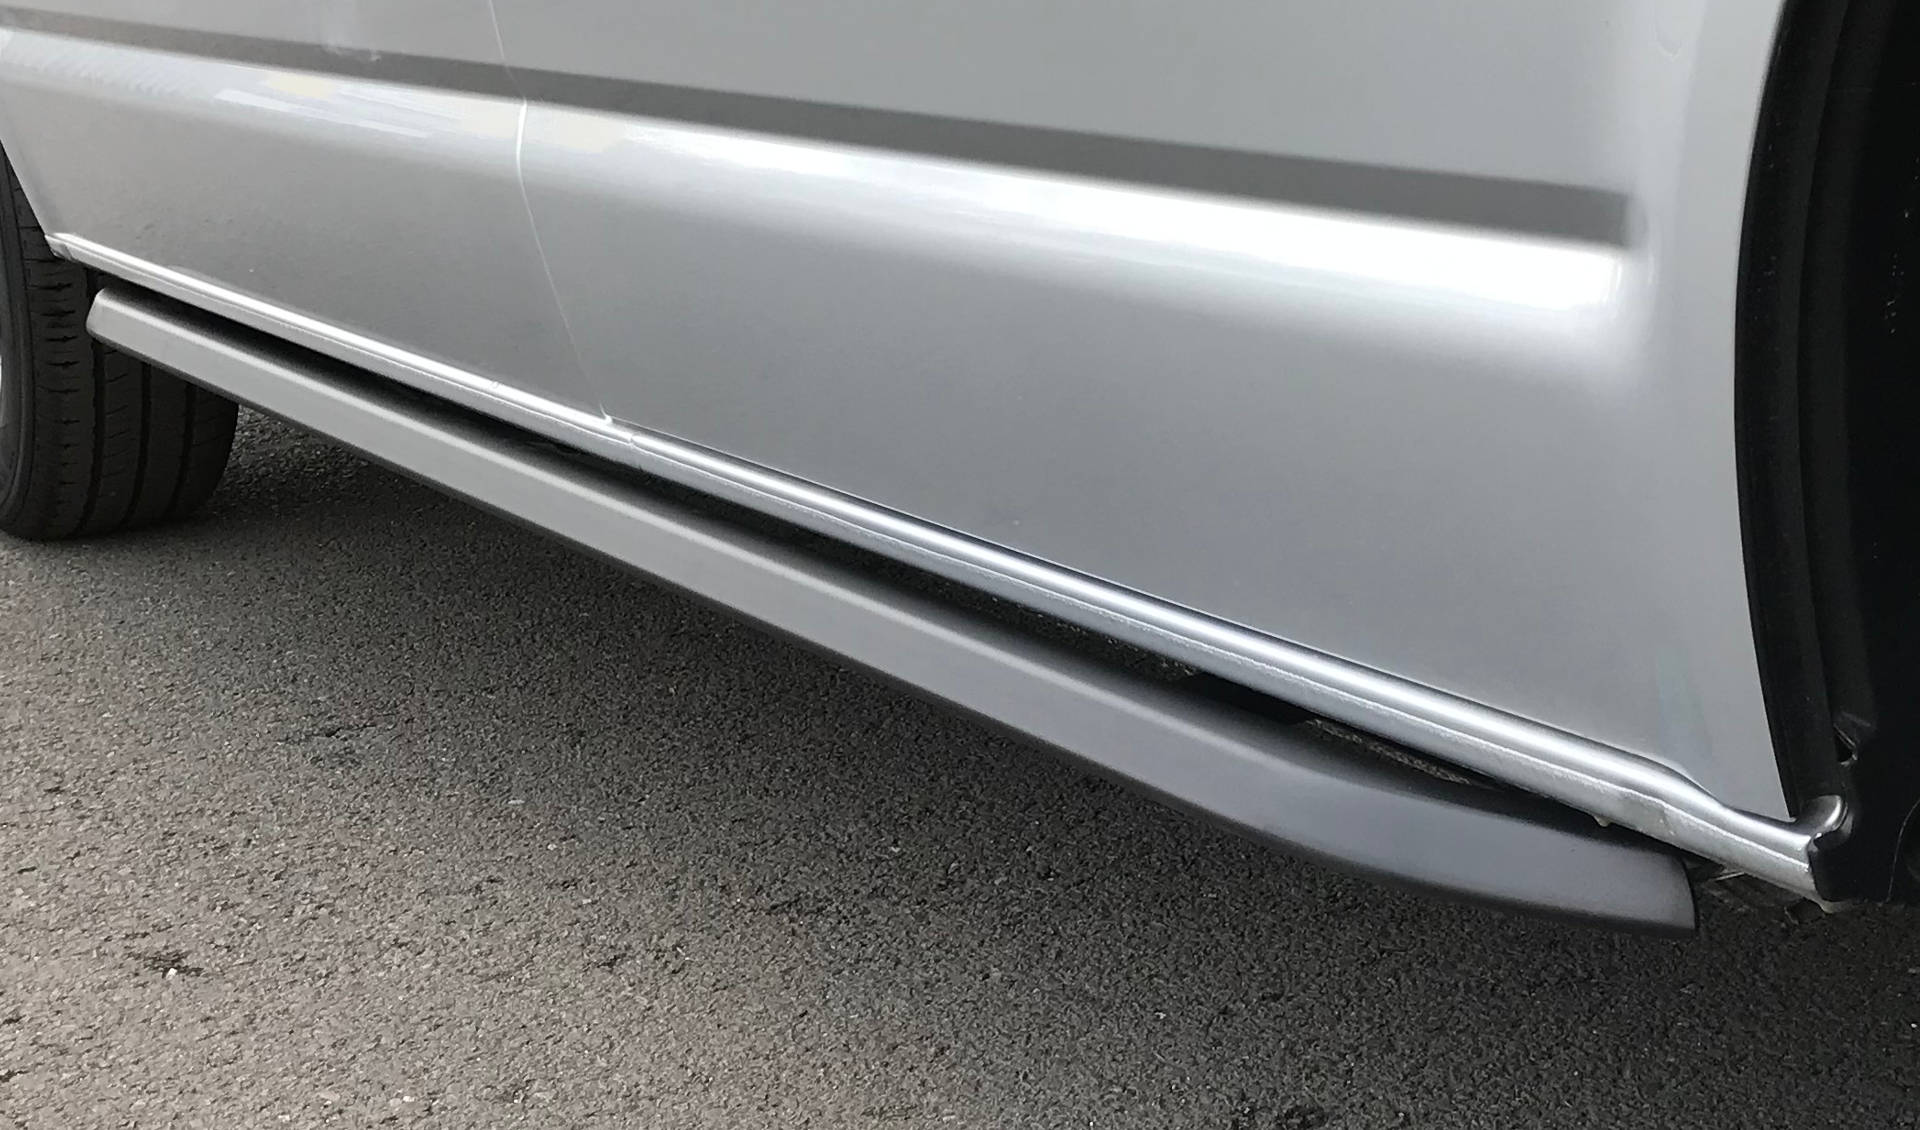 Black Angular OE Style Side Bars for Volkswagen Transporter T5 SWB -  - sold by Direct4x4